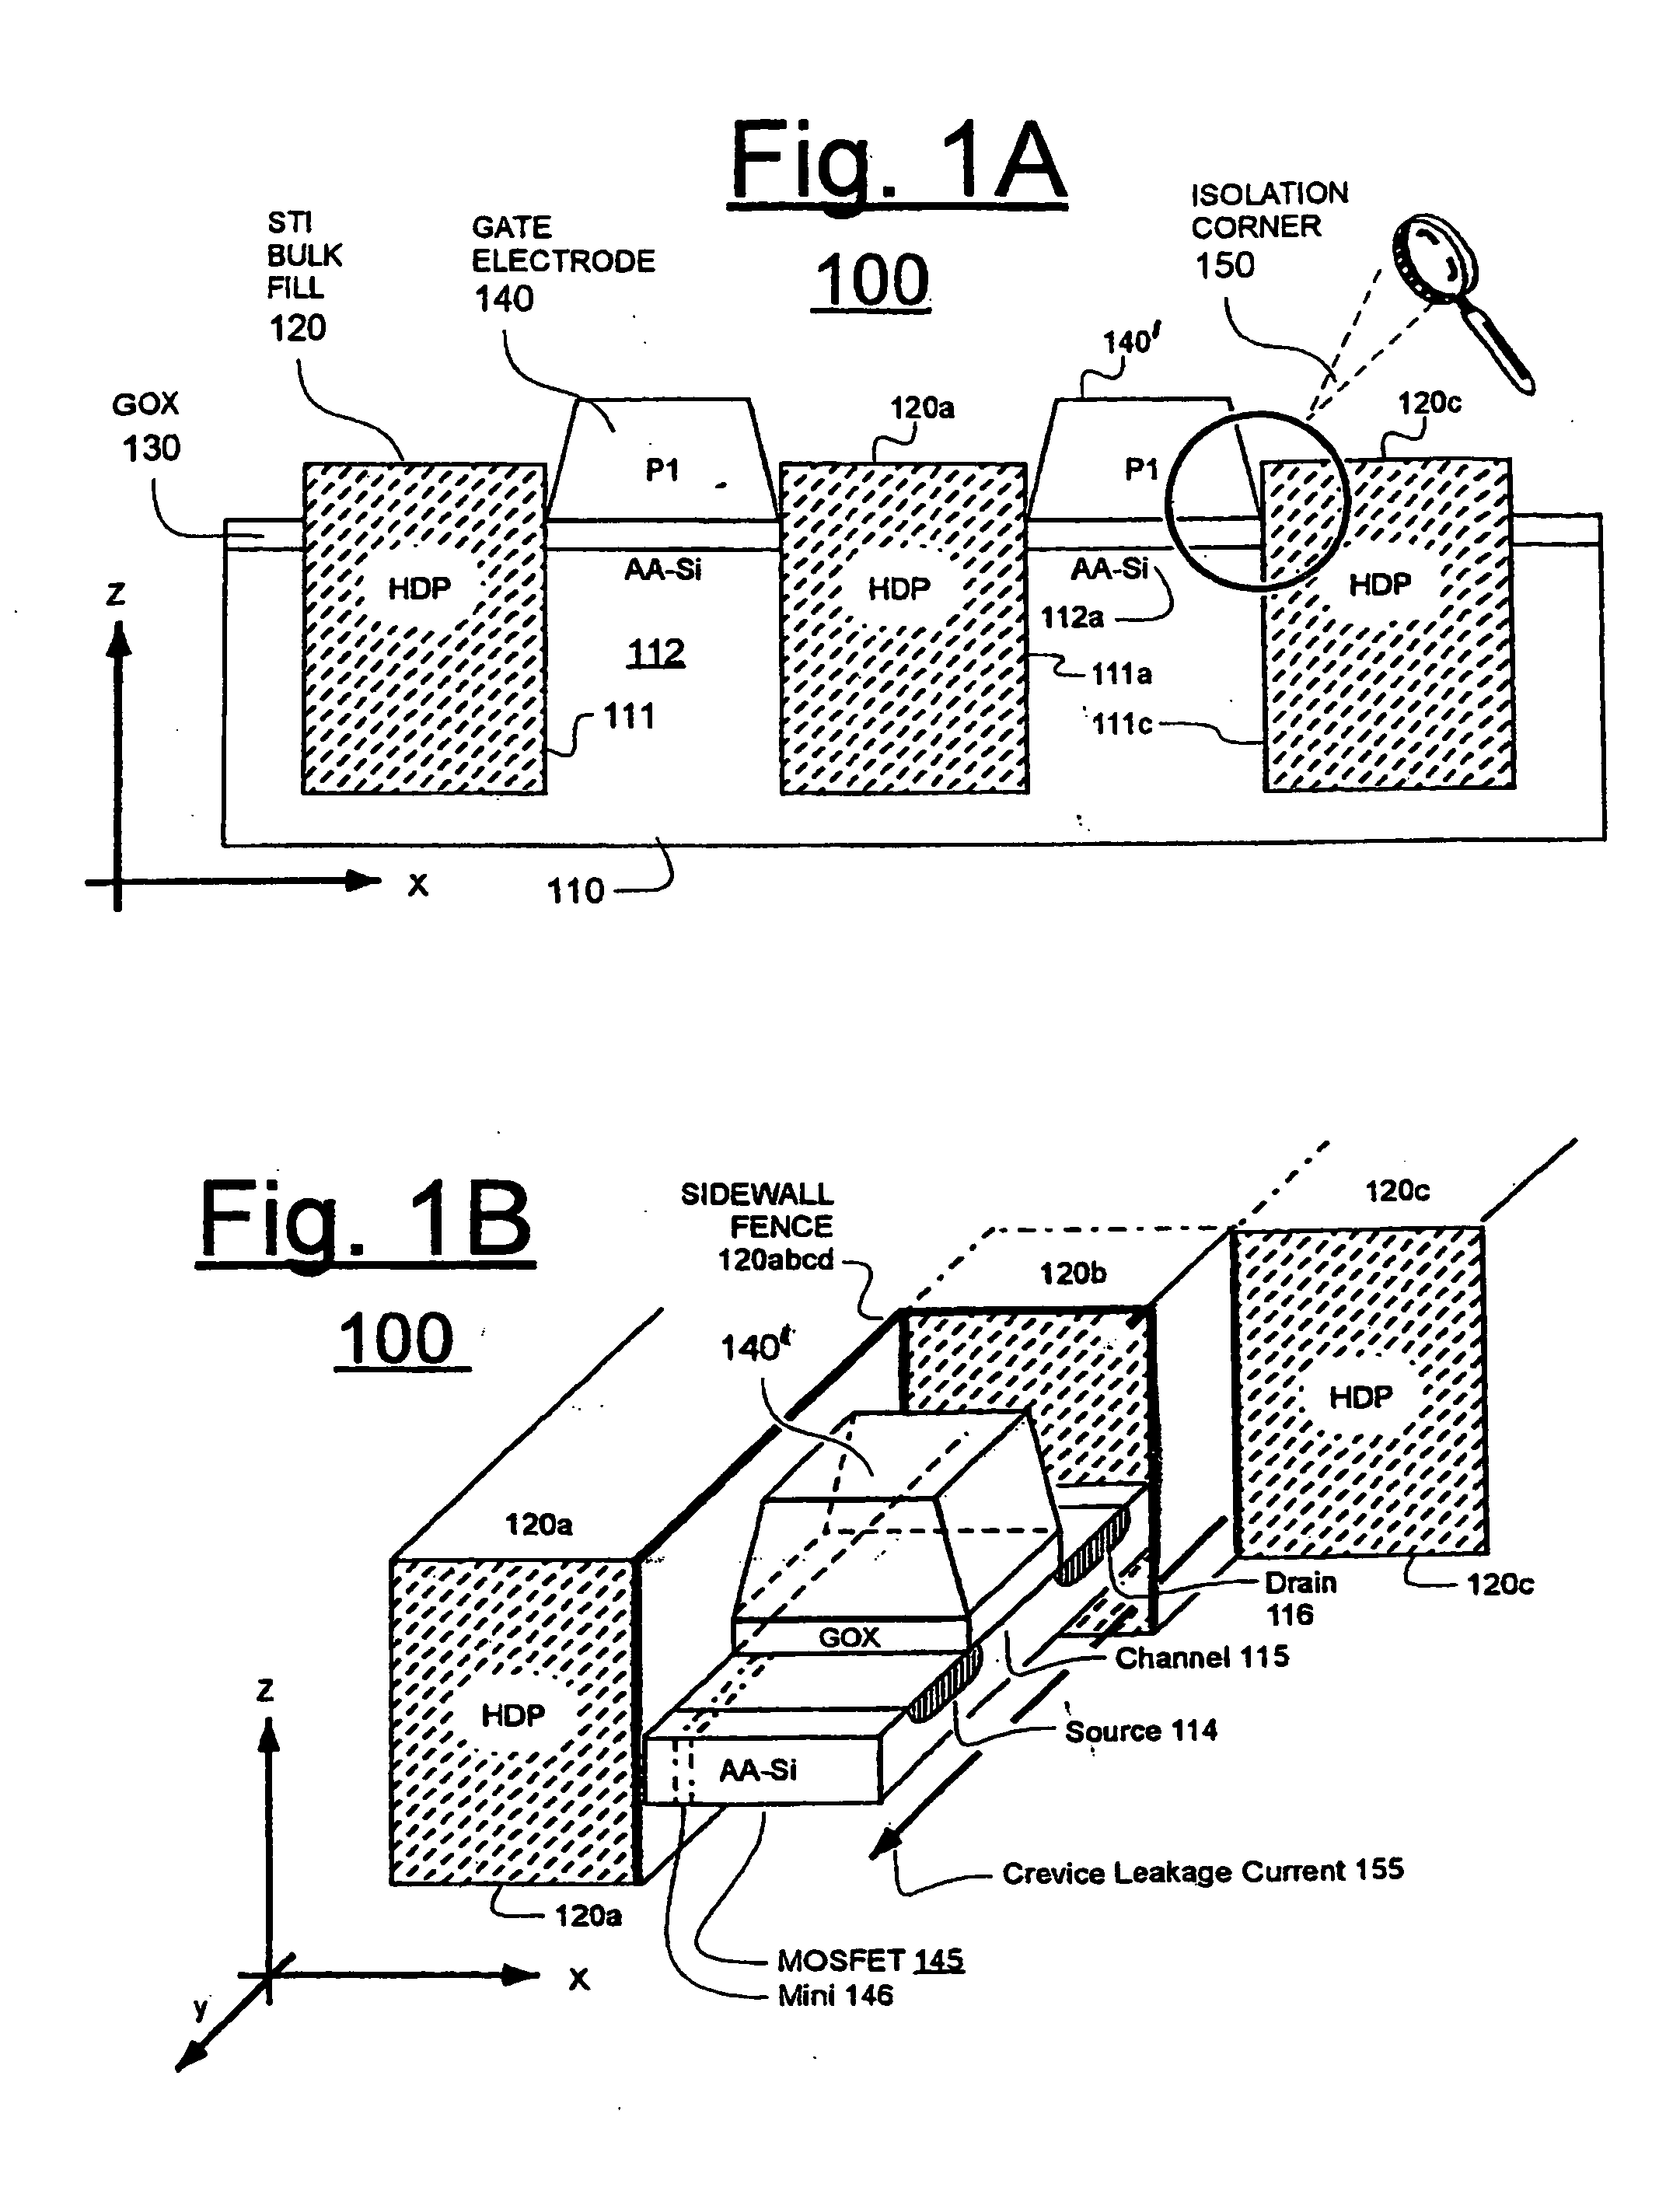 Formation of removable shroud by anisotropic plasma etch